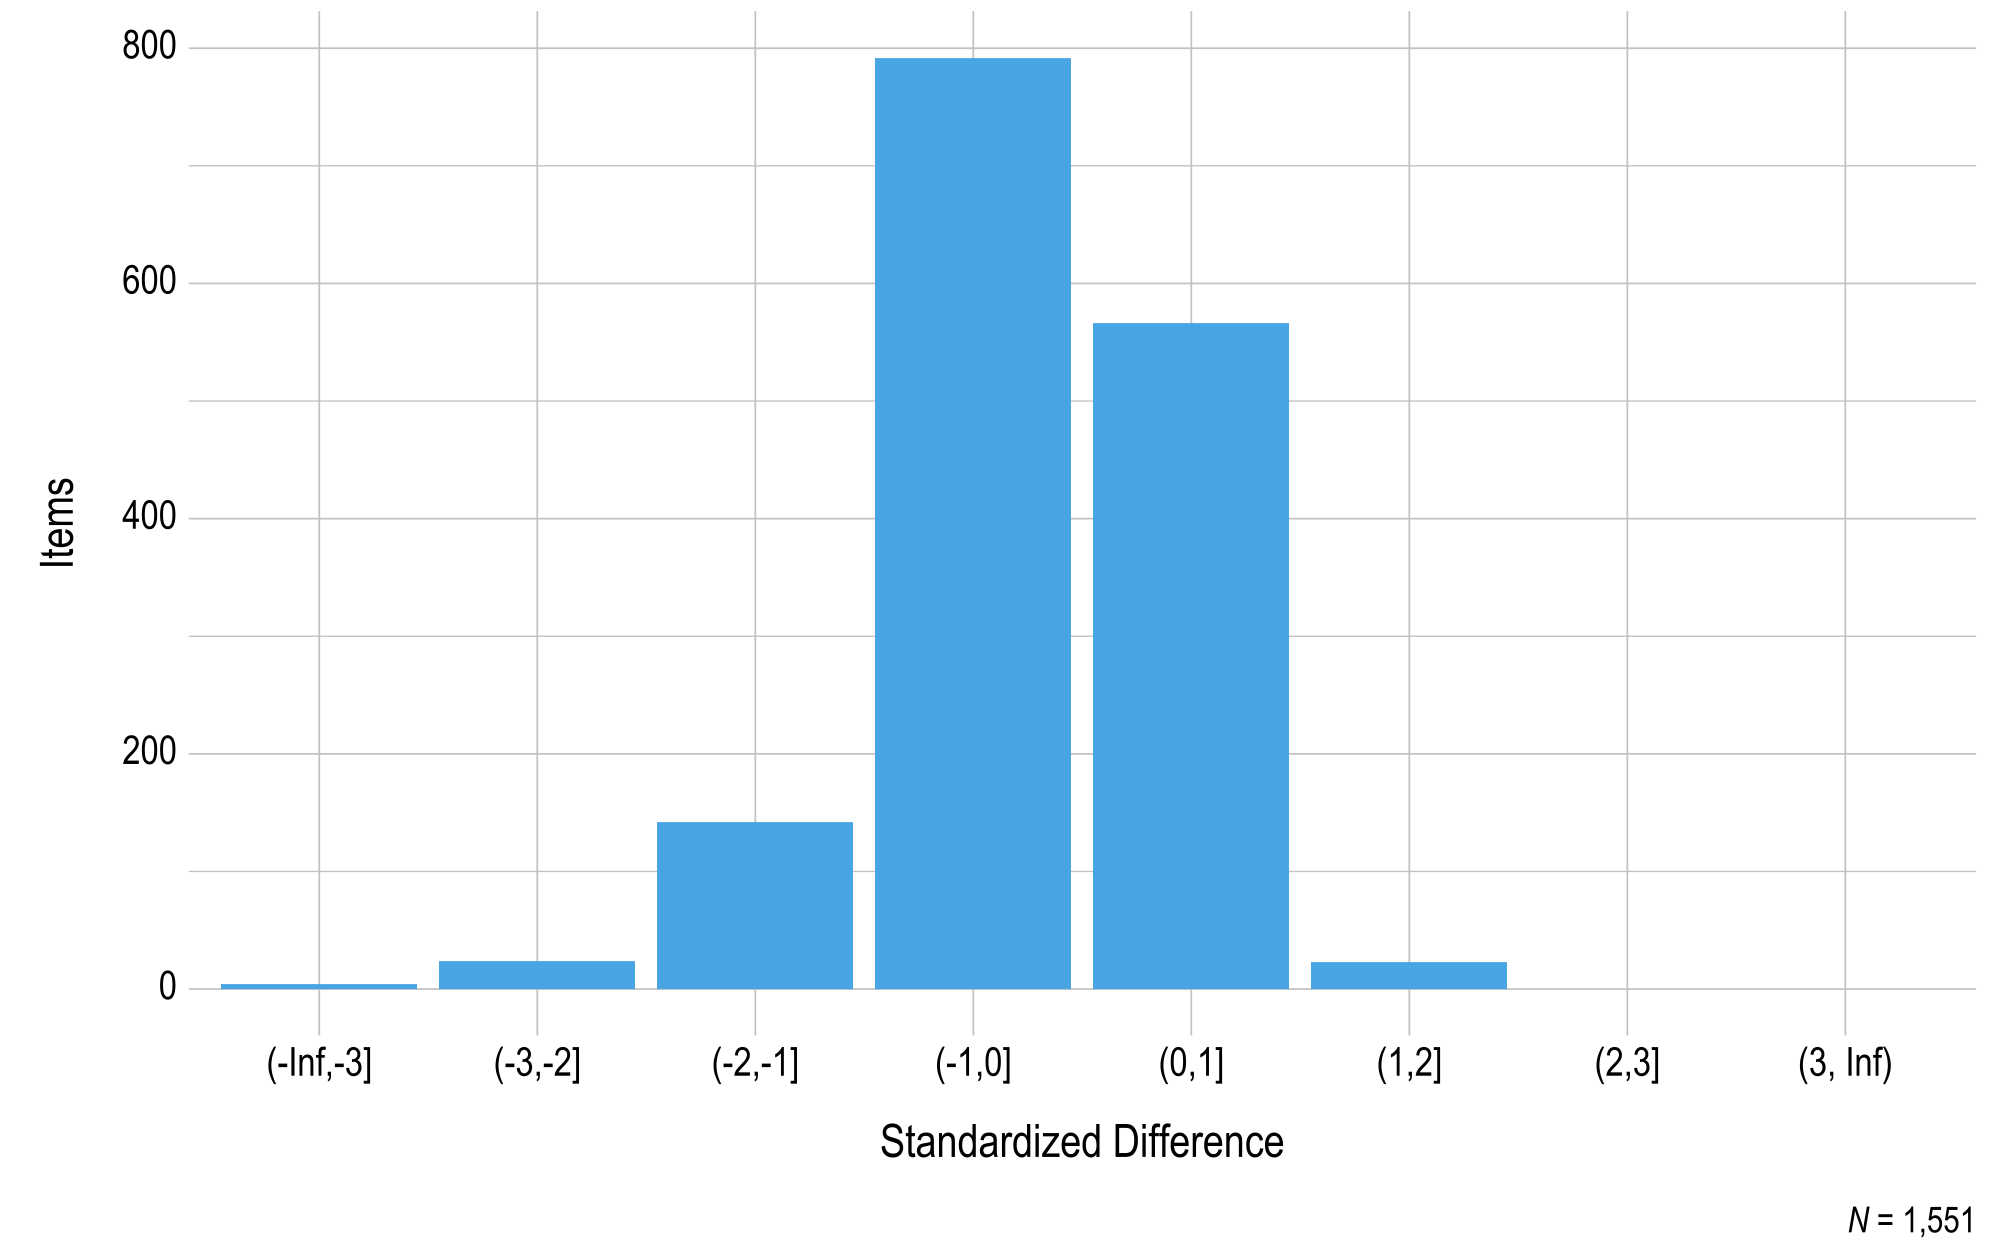 This figure contains a histogram displaying standardized difference on the x-axis and the number of English language arts operational items on the y-axis.